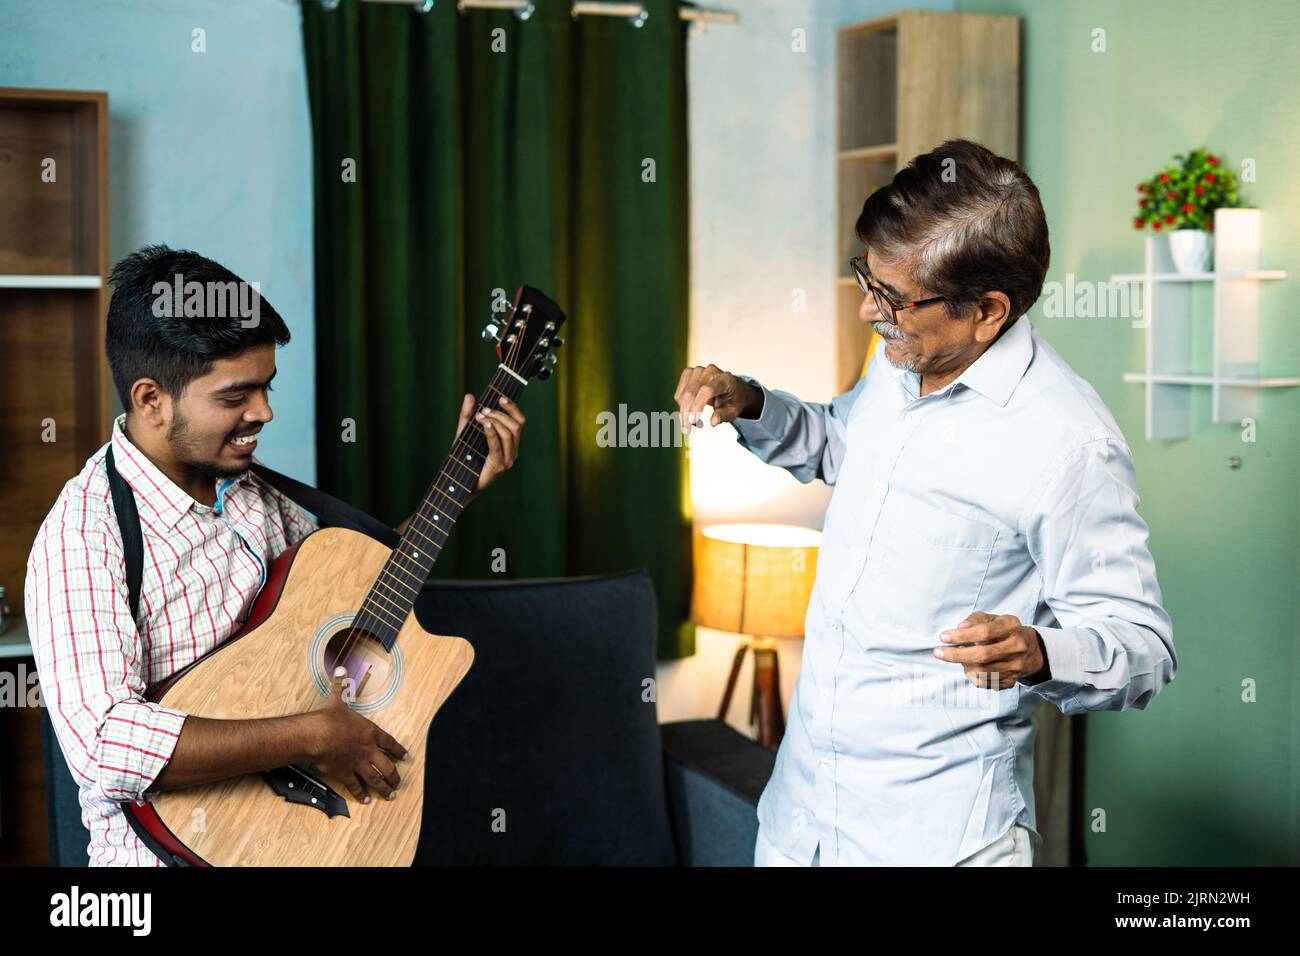 focus on old man, Happy father with son dancing by playing guitar at home - concept of leisure retirement lifestyles, family bonding and freedom Stock Photo